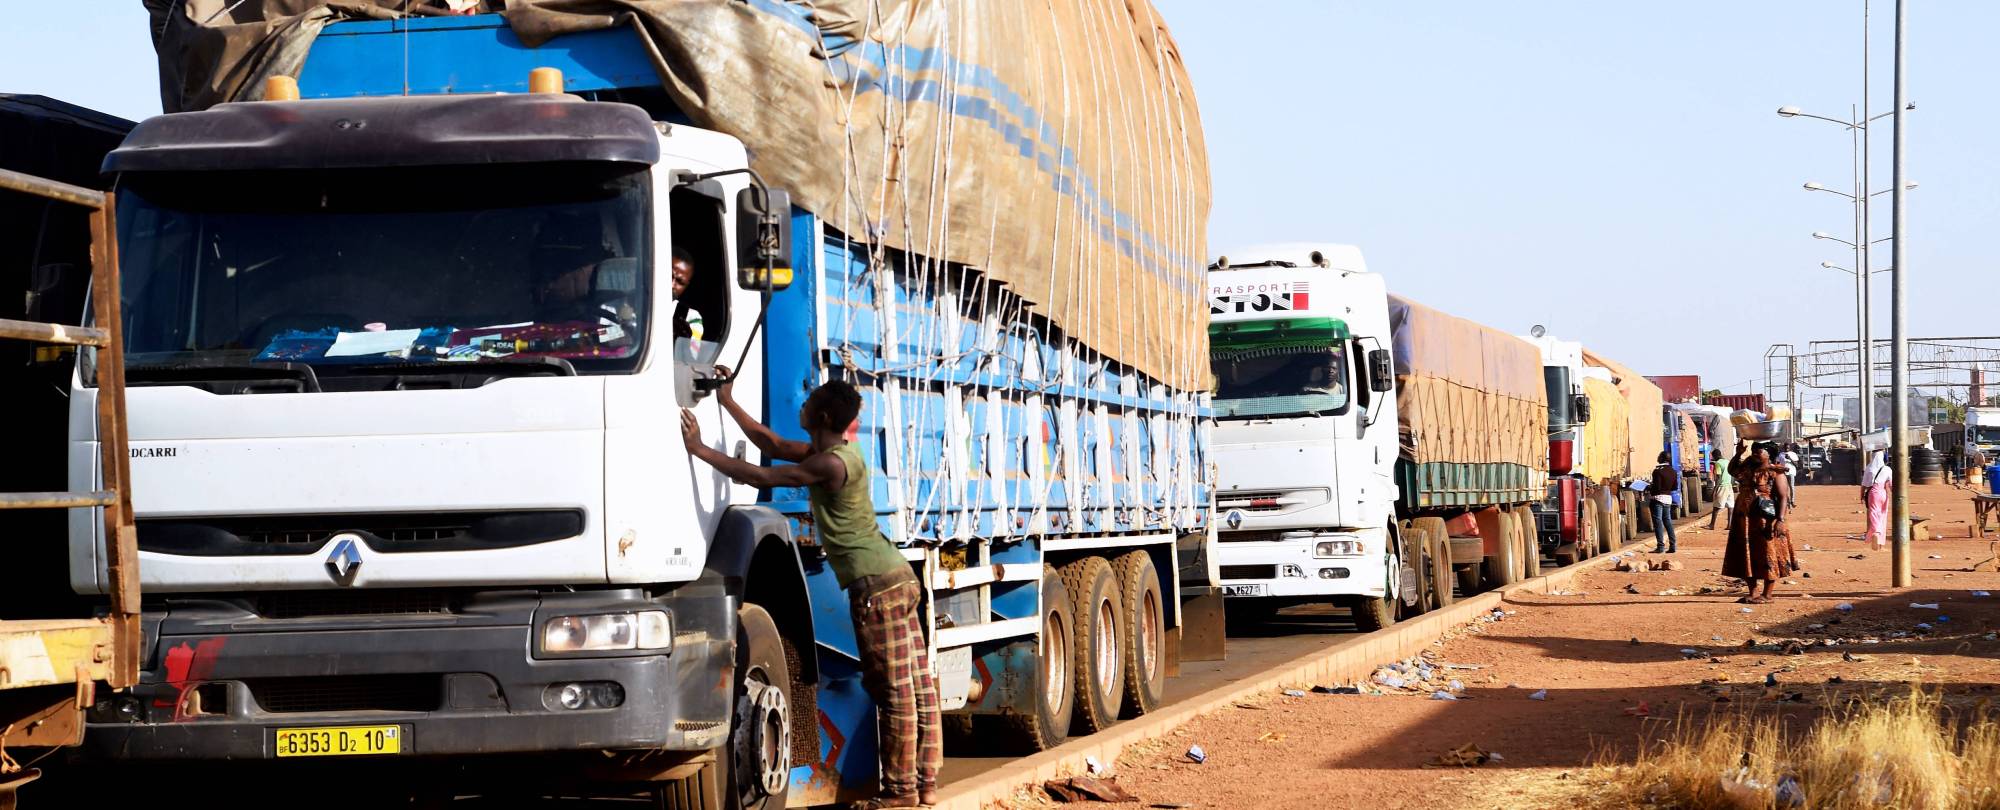 A line of trucks in Togo, waiting to cross the border into Burkina Faso